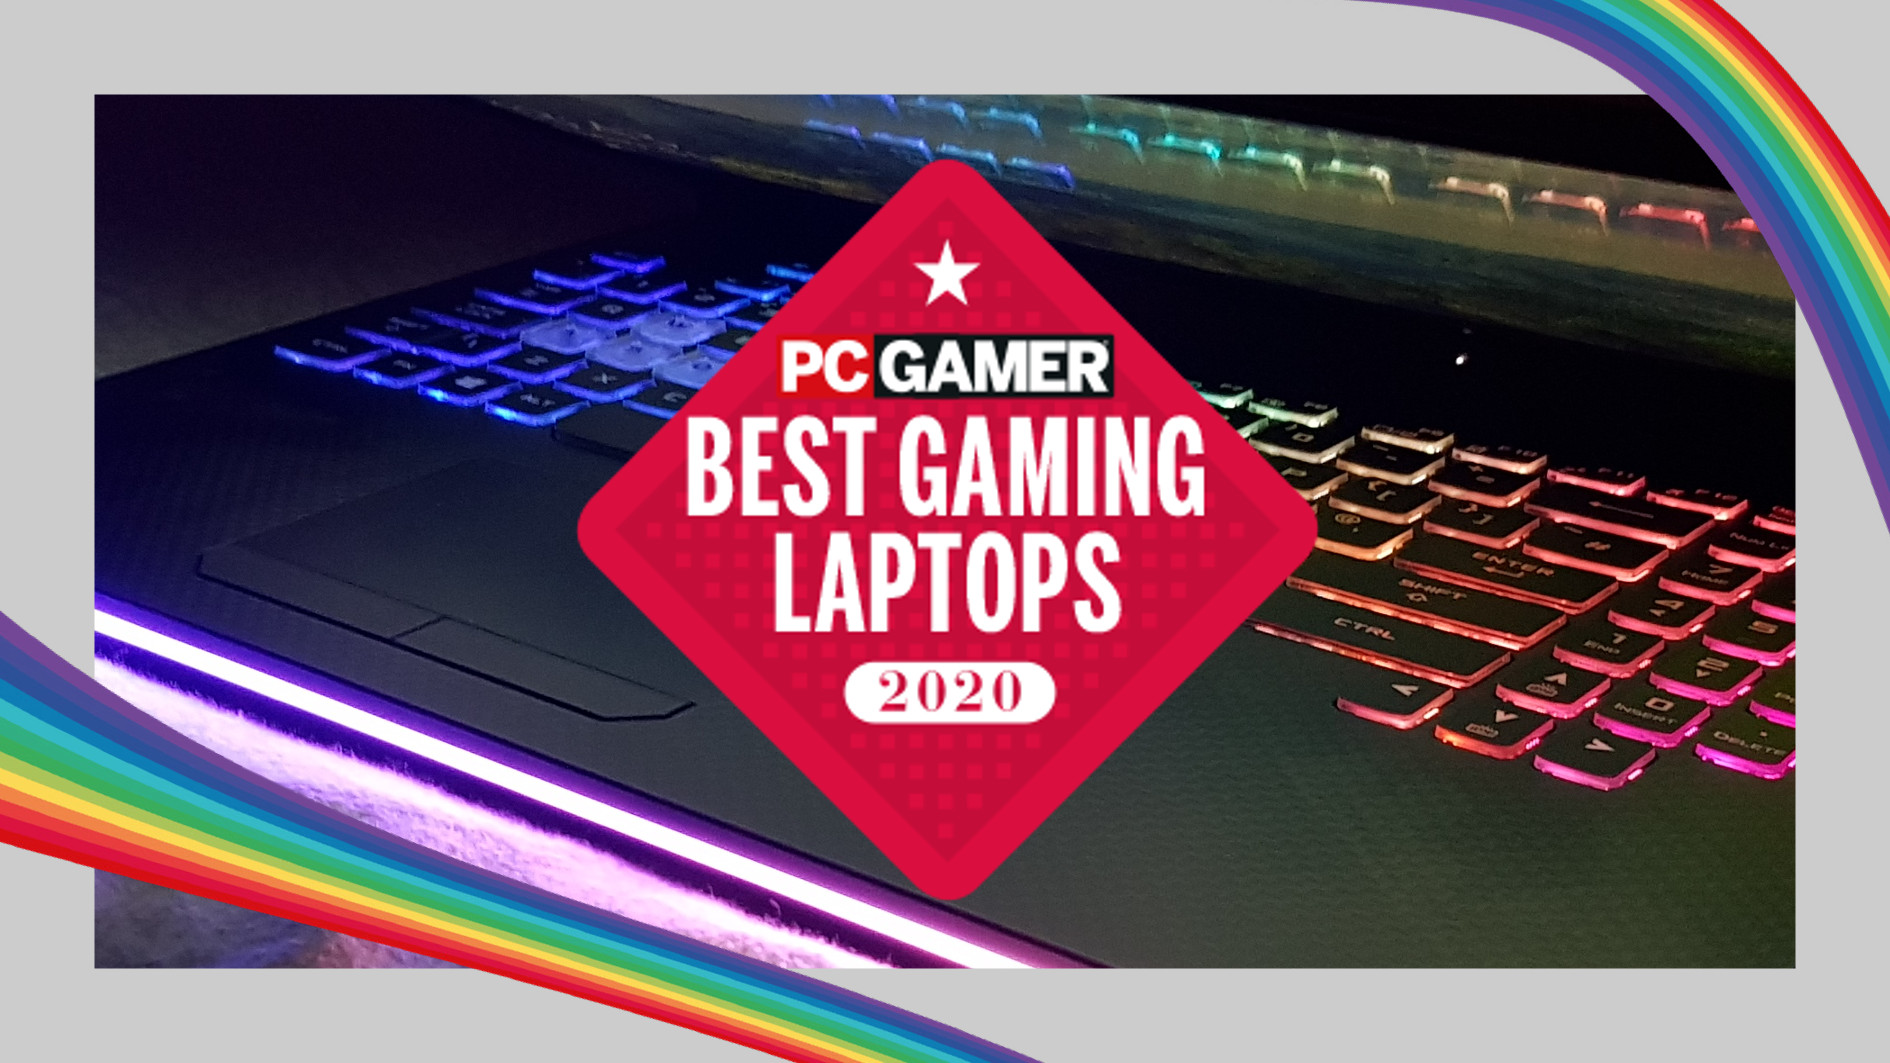 The PC is voted greatest piece of hardware of all time; Gabe